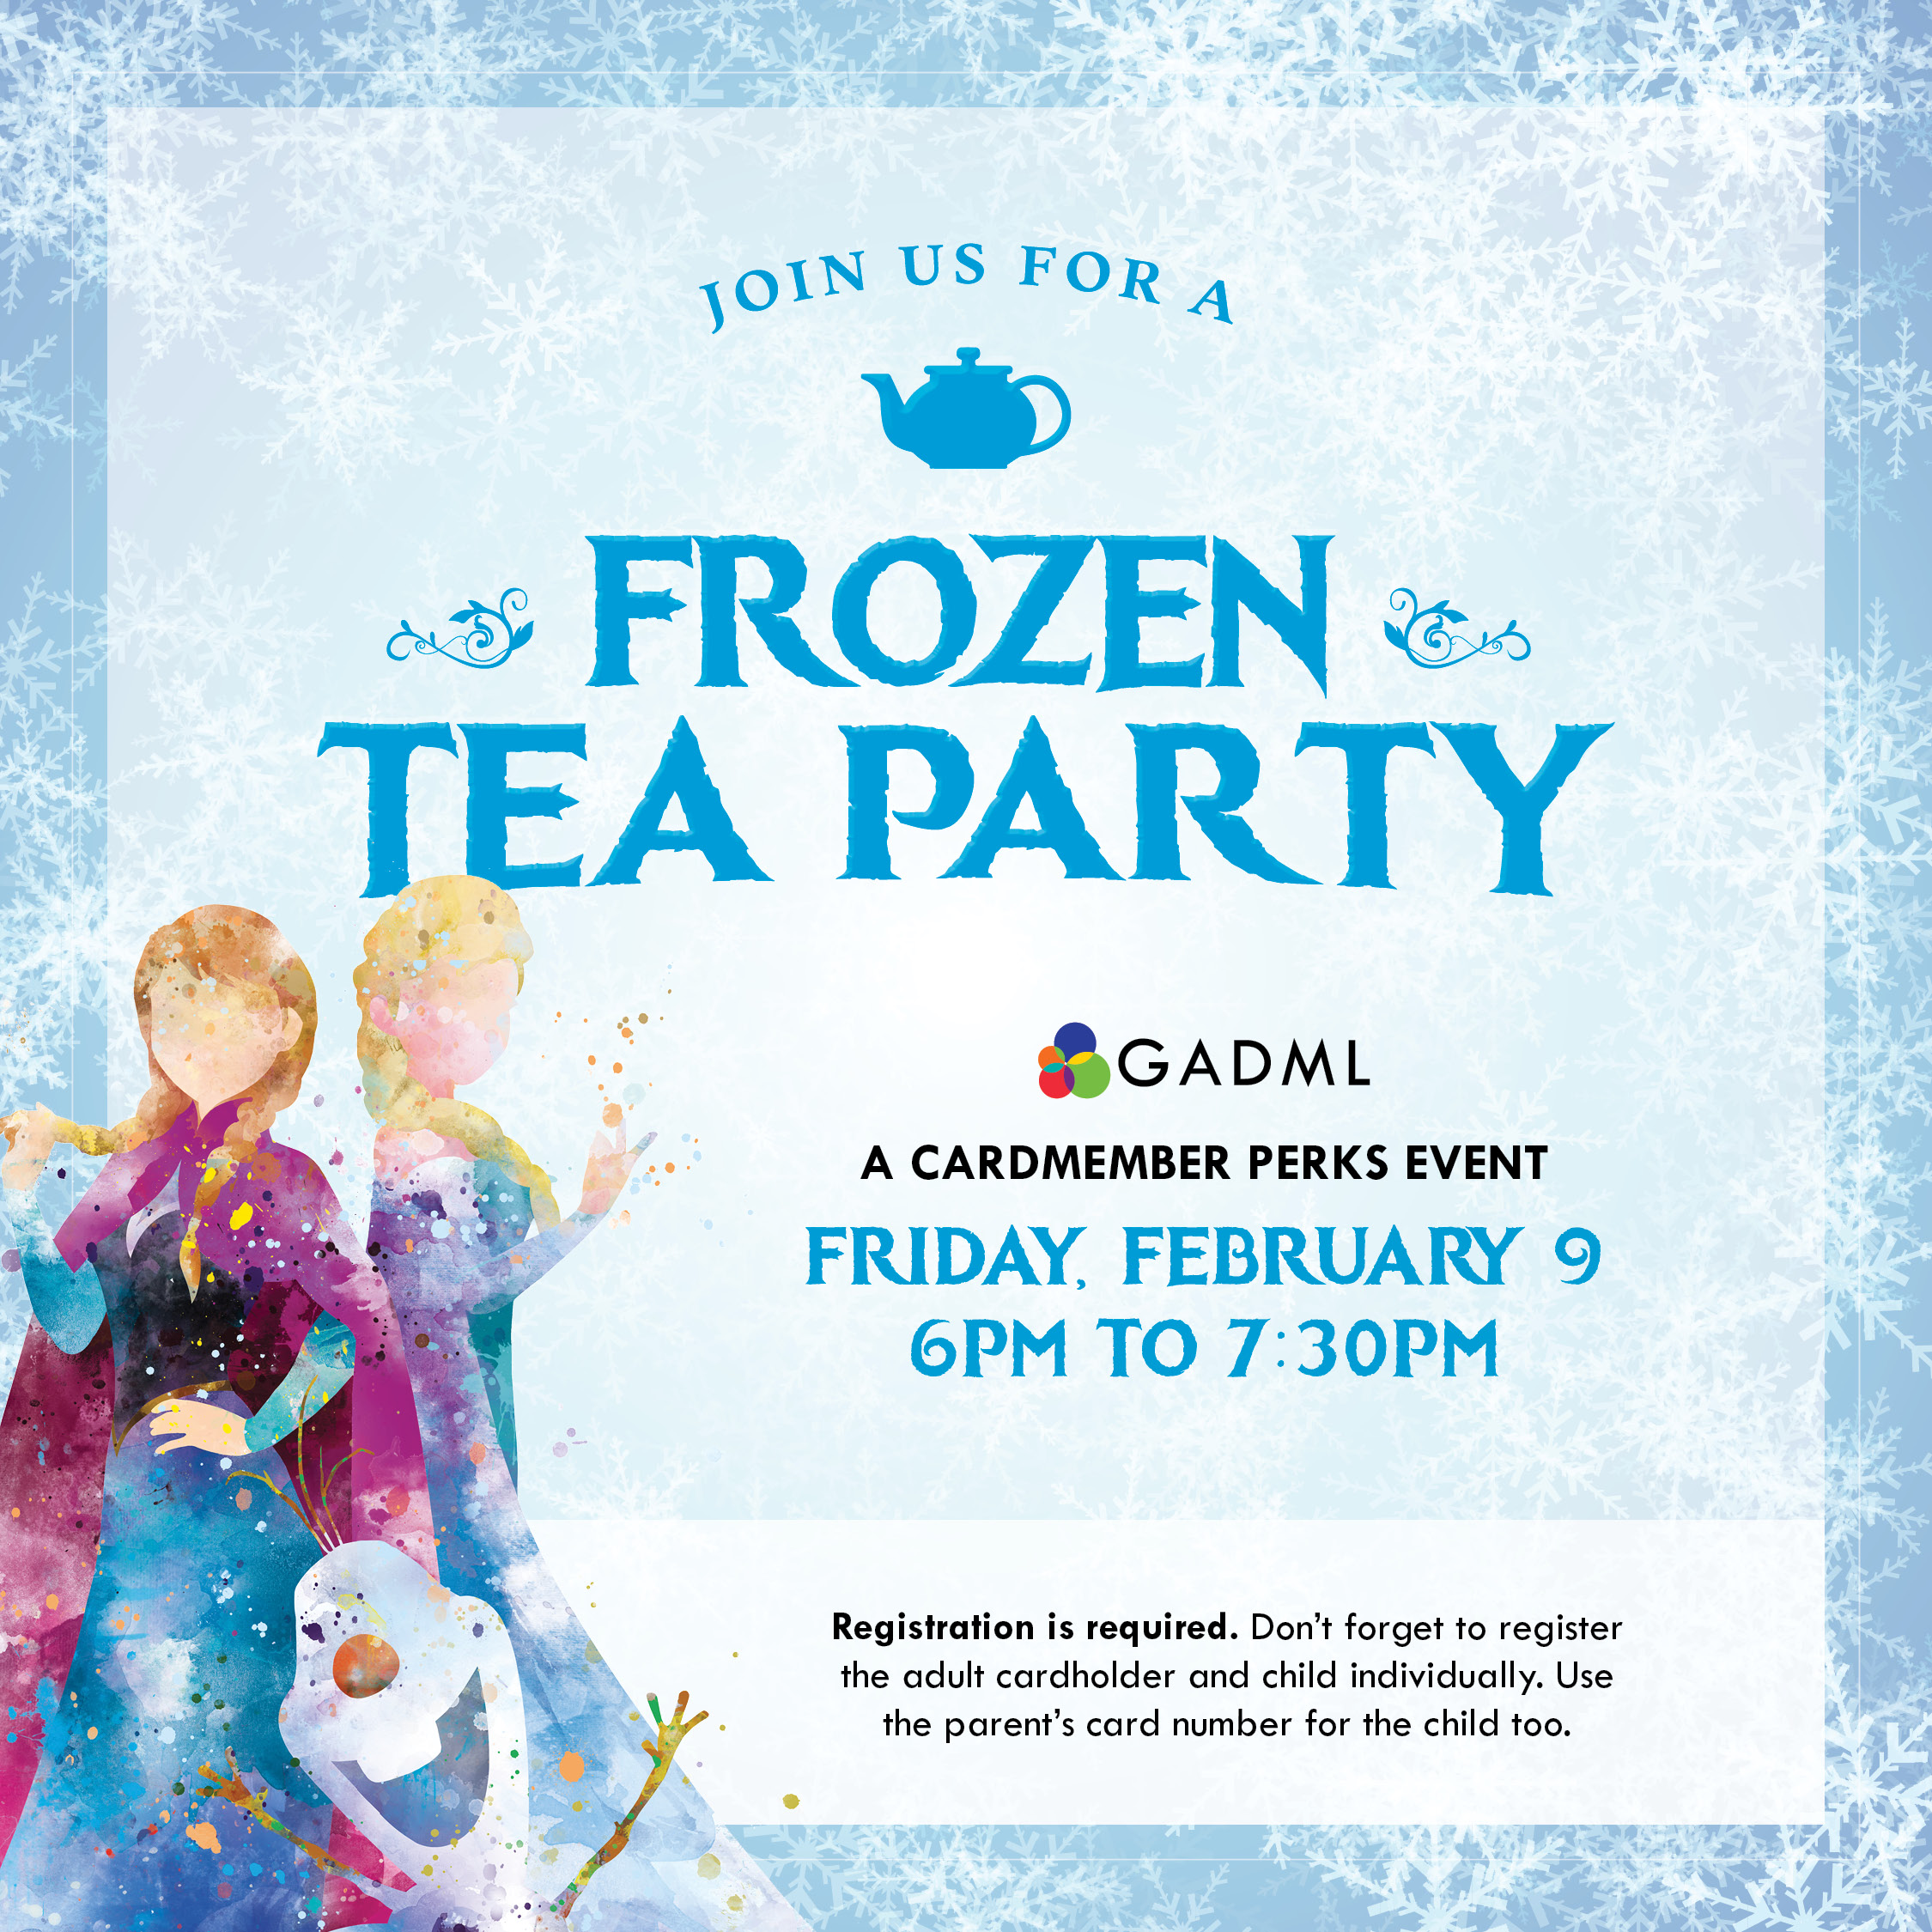 Frozen Tea Party, February 9, 6pm, Registration required